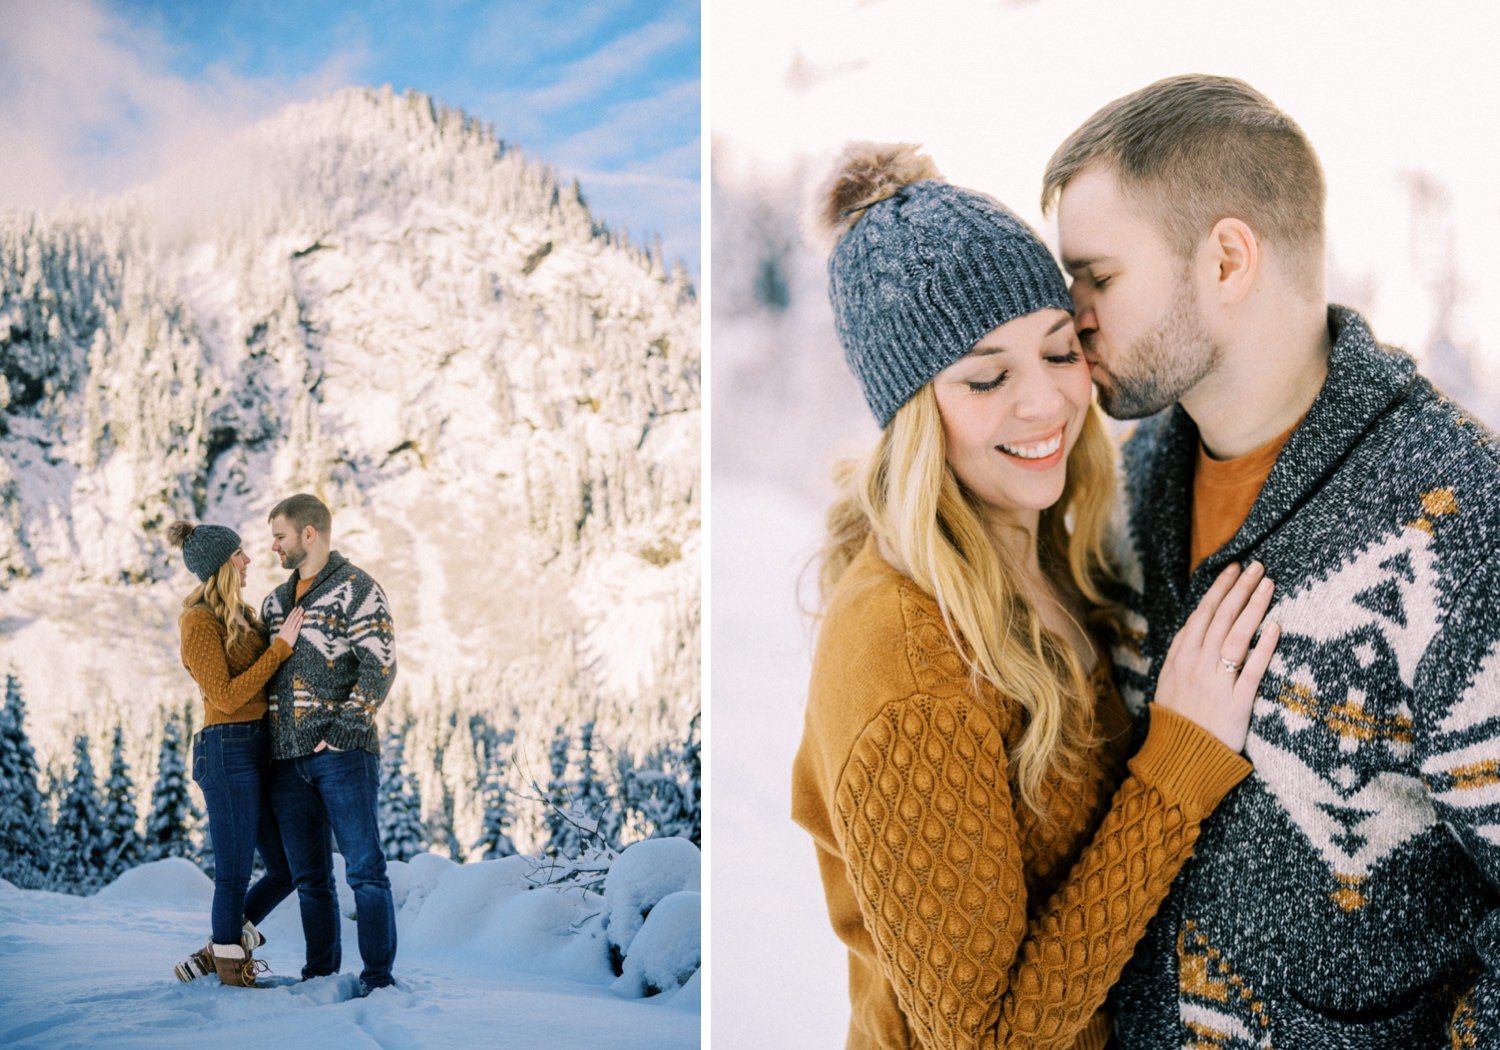 08_Snowy engagement photos at Snoqualmie Pass near Seattle, with a film-like style by Ryan Flynn Photography.jpg